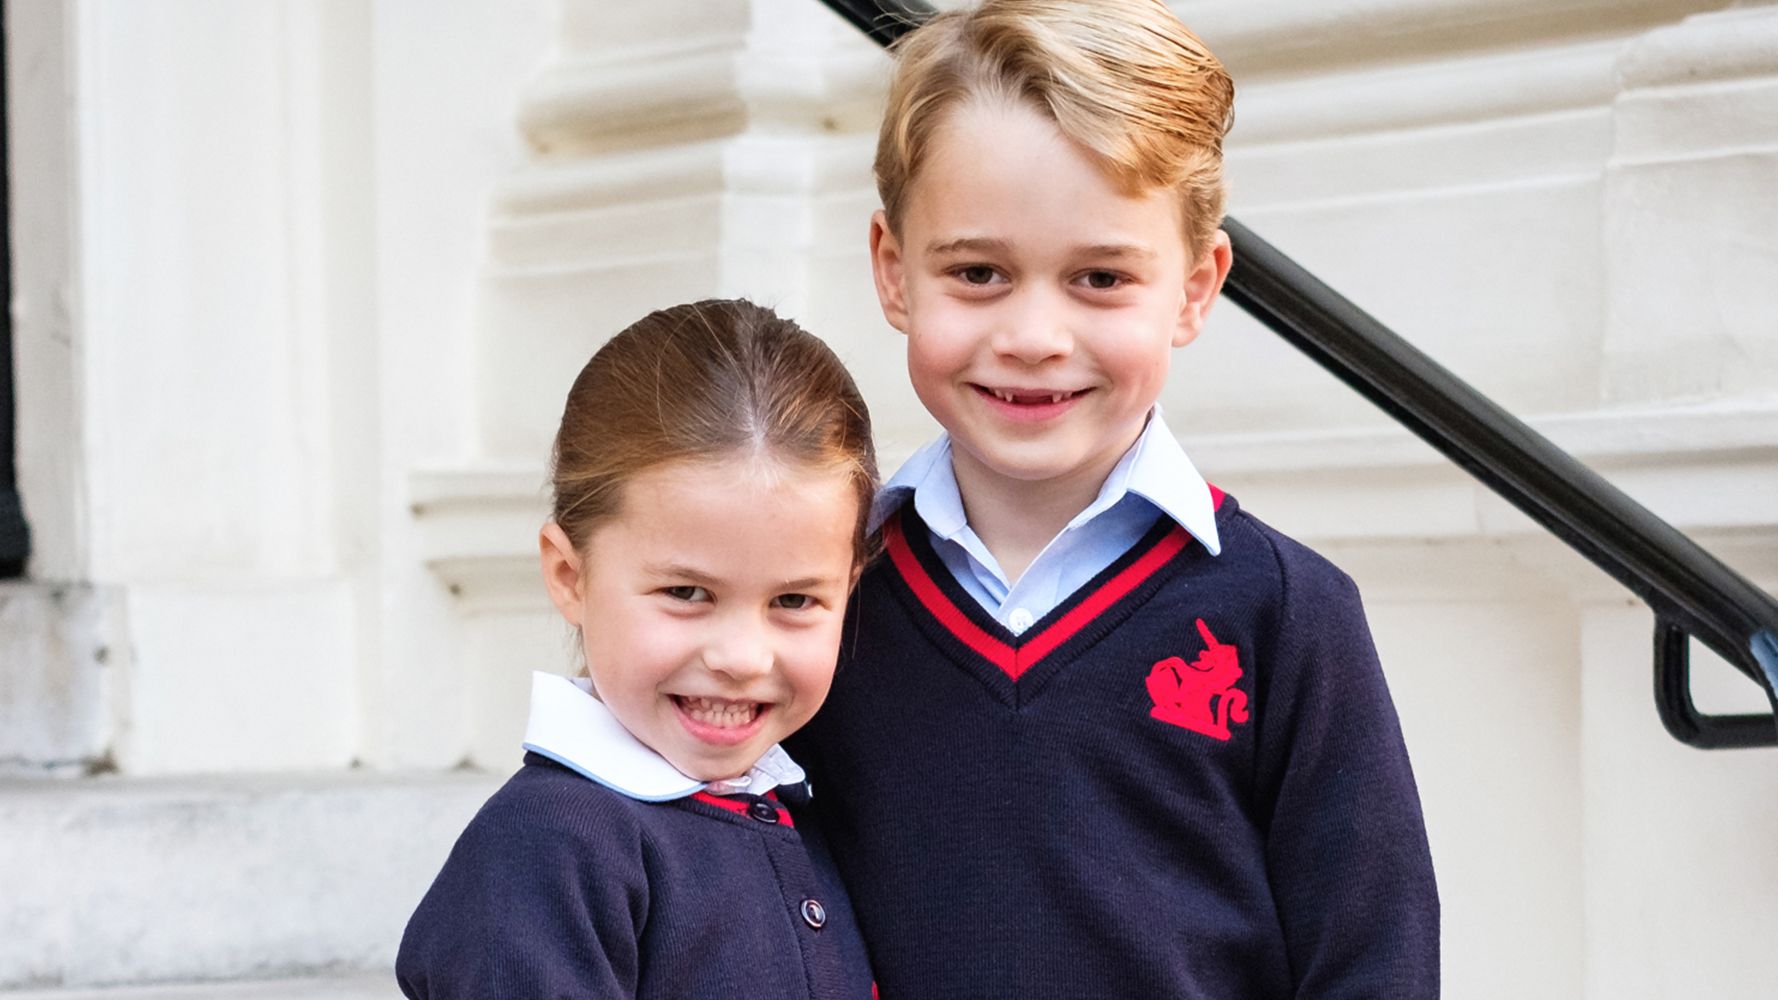 Kate Middleton shares update on George and Charlotte's new school